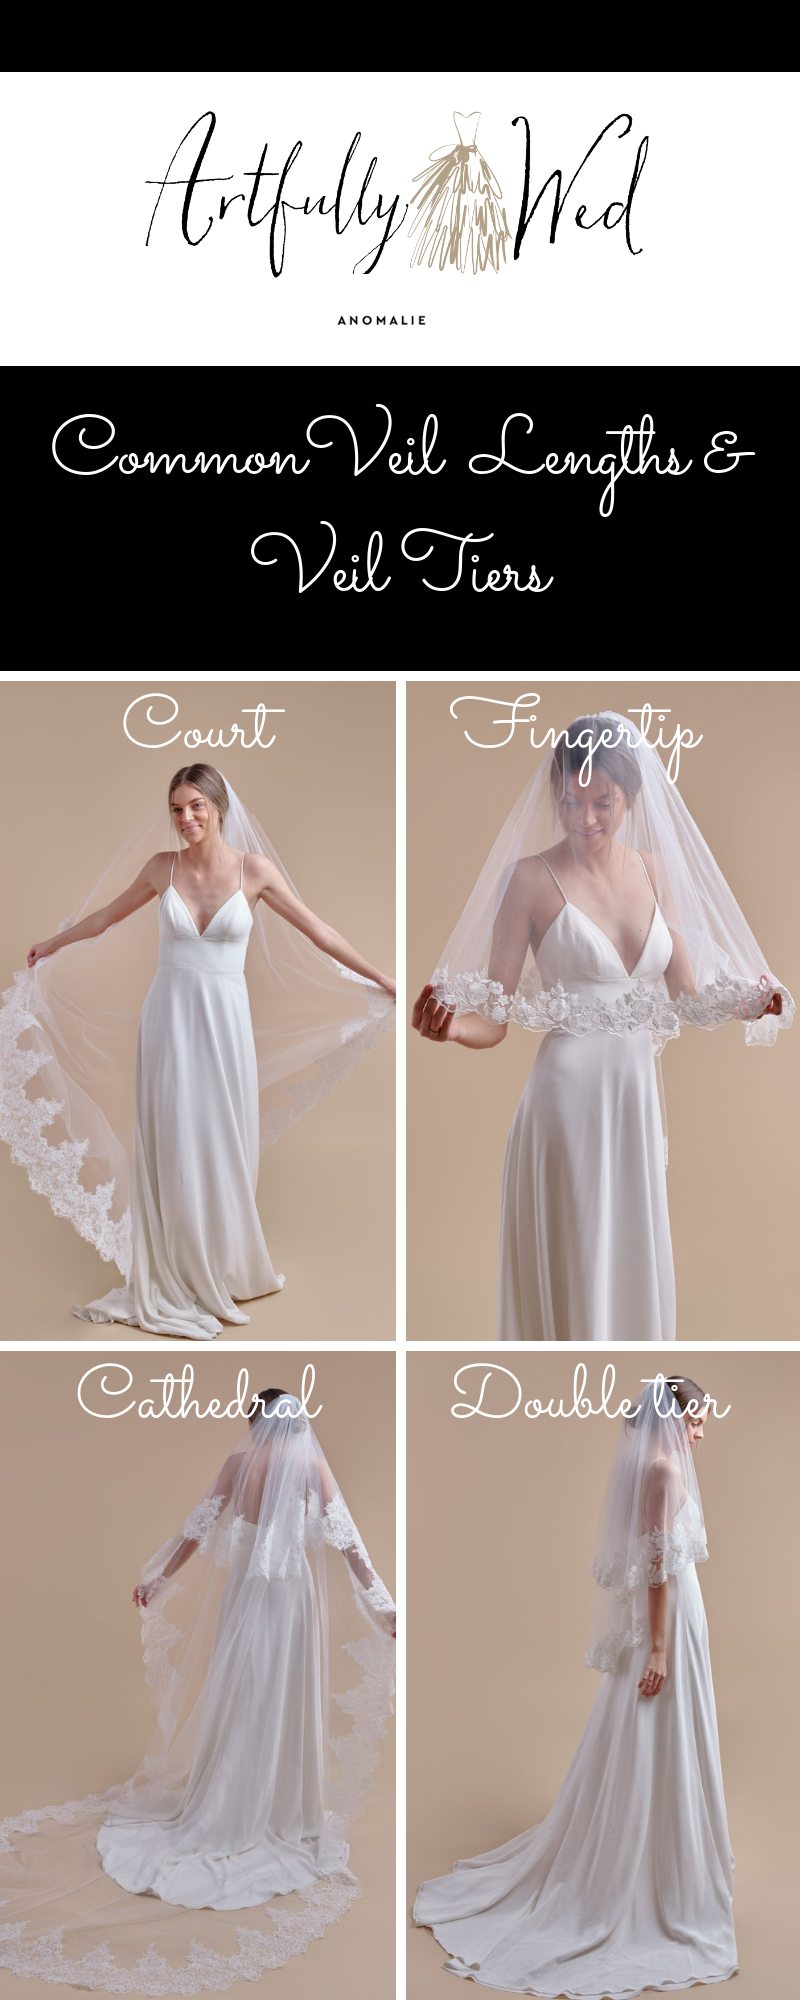 The 10 Wedding Veil Lengths and Types You Must Consider